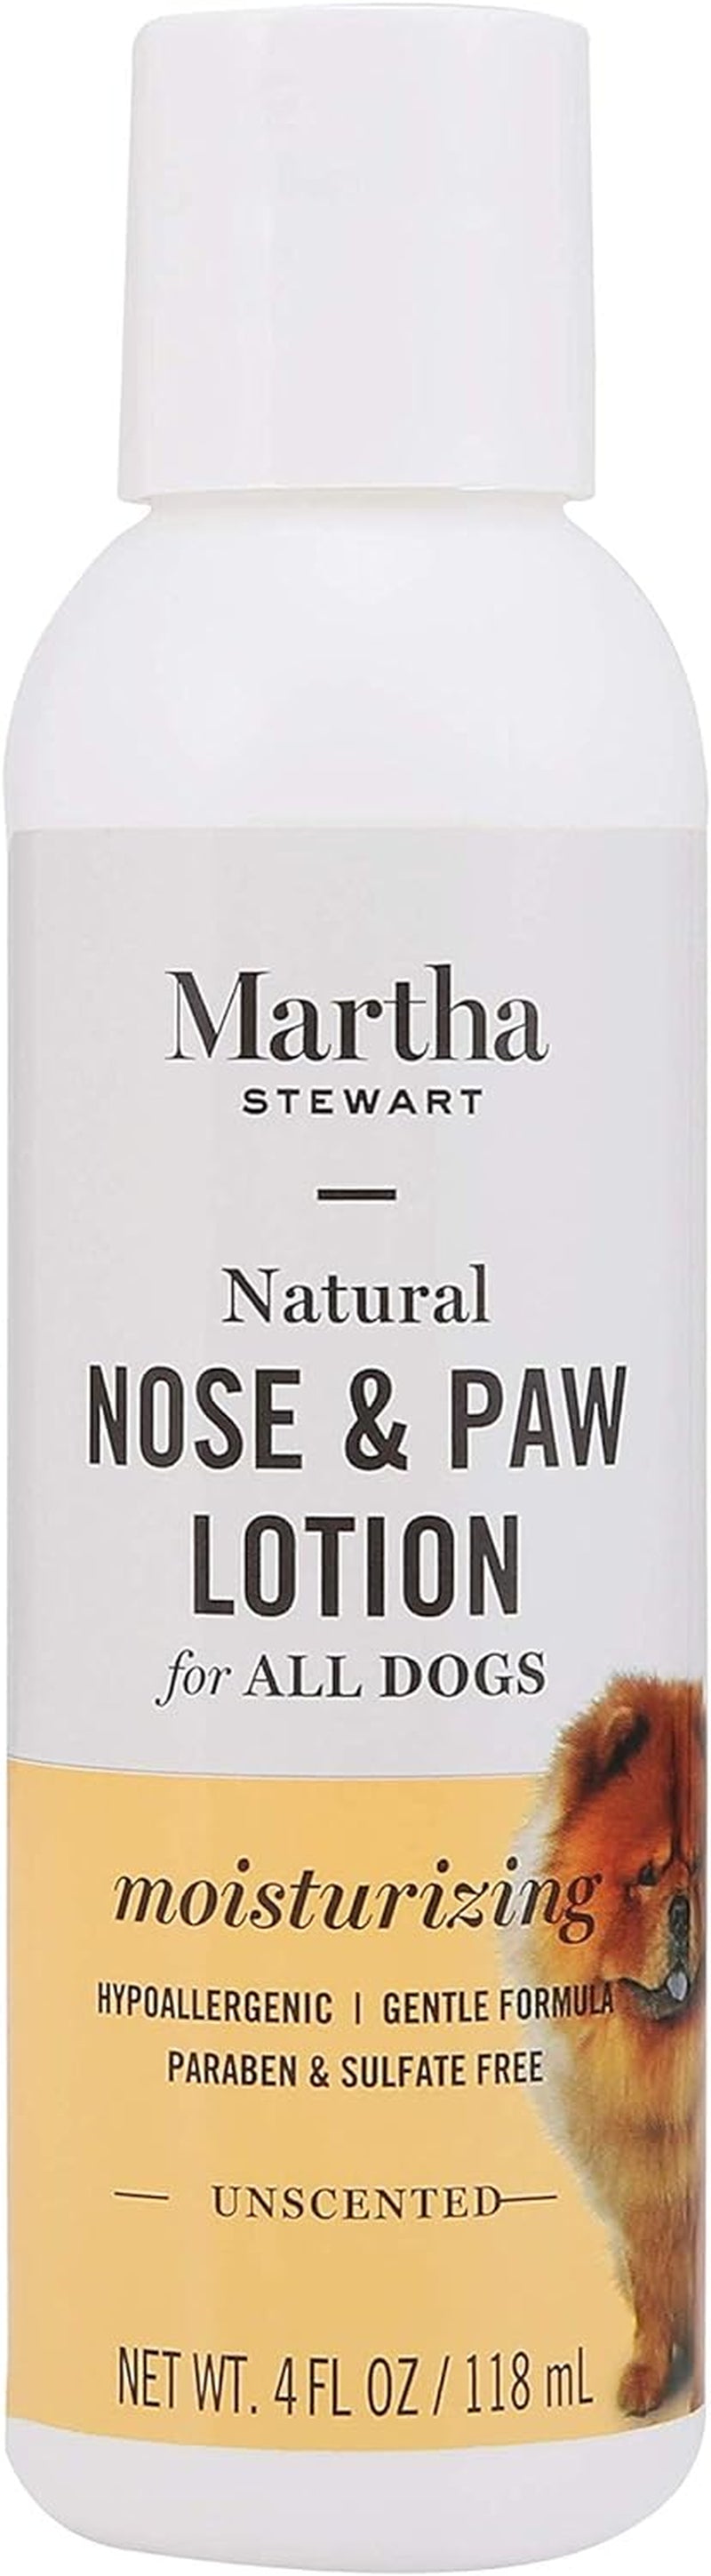 for Pets Moisturizing Conditioner for Dogs | Puppy and Dog Conditioner for Dry Itchy Skin, 16 Ounces | Nourishing Way to Moisturize Your Dog'S Coat